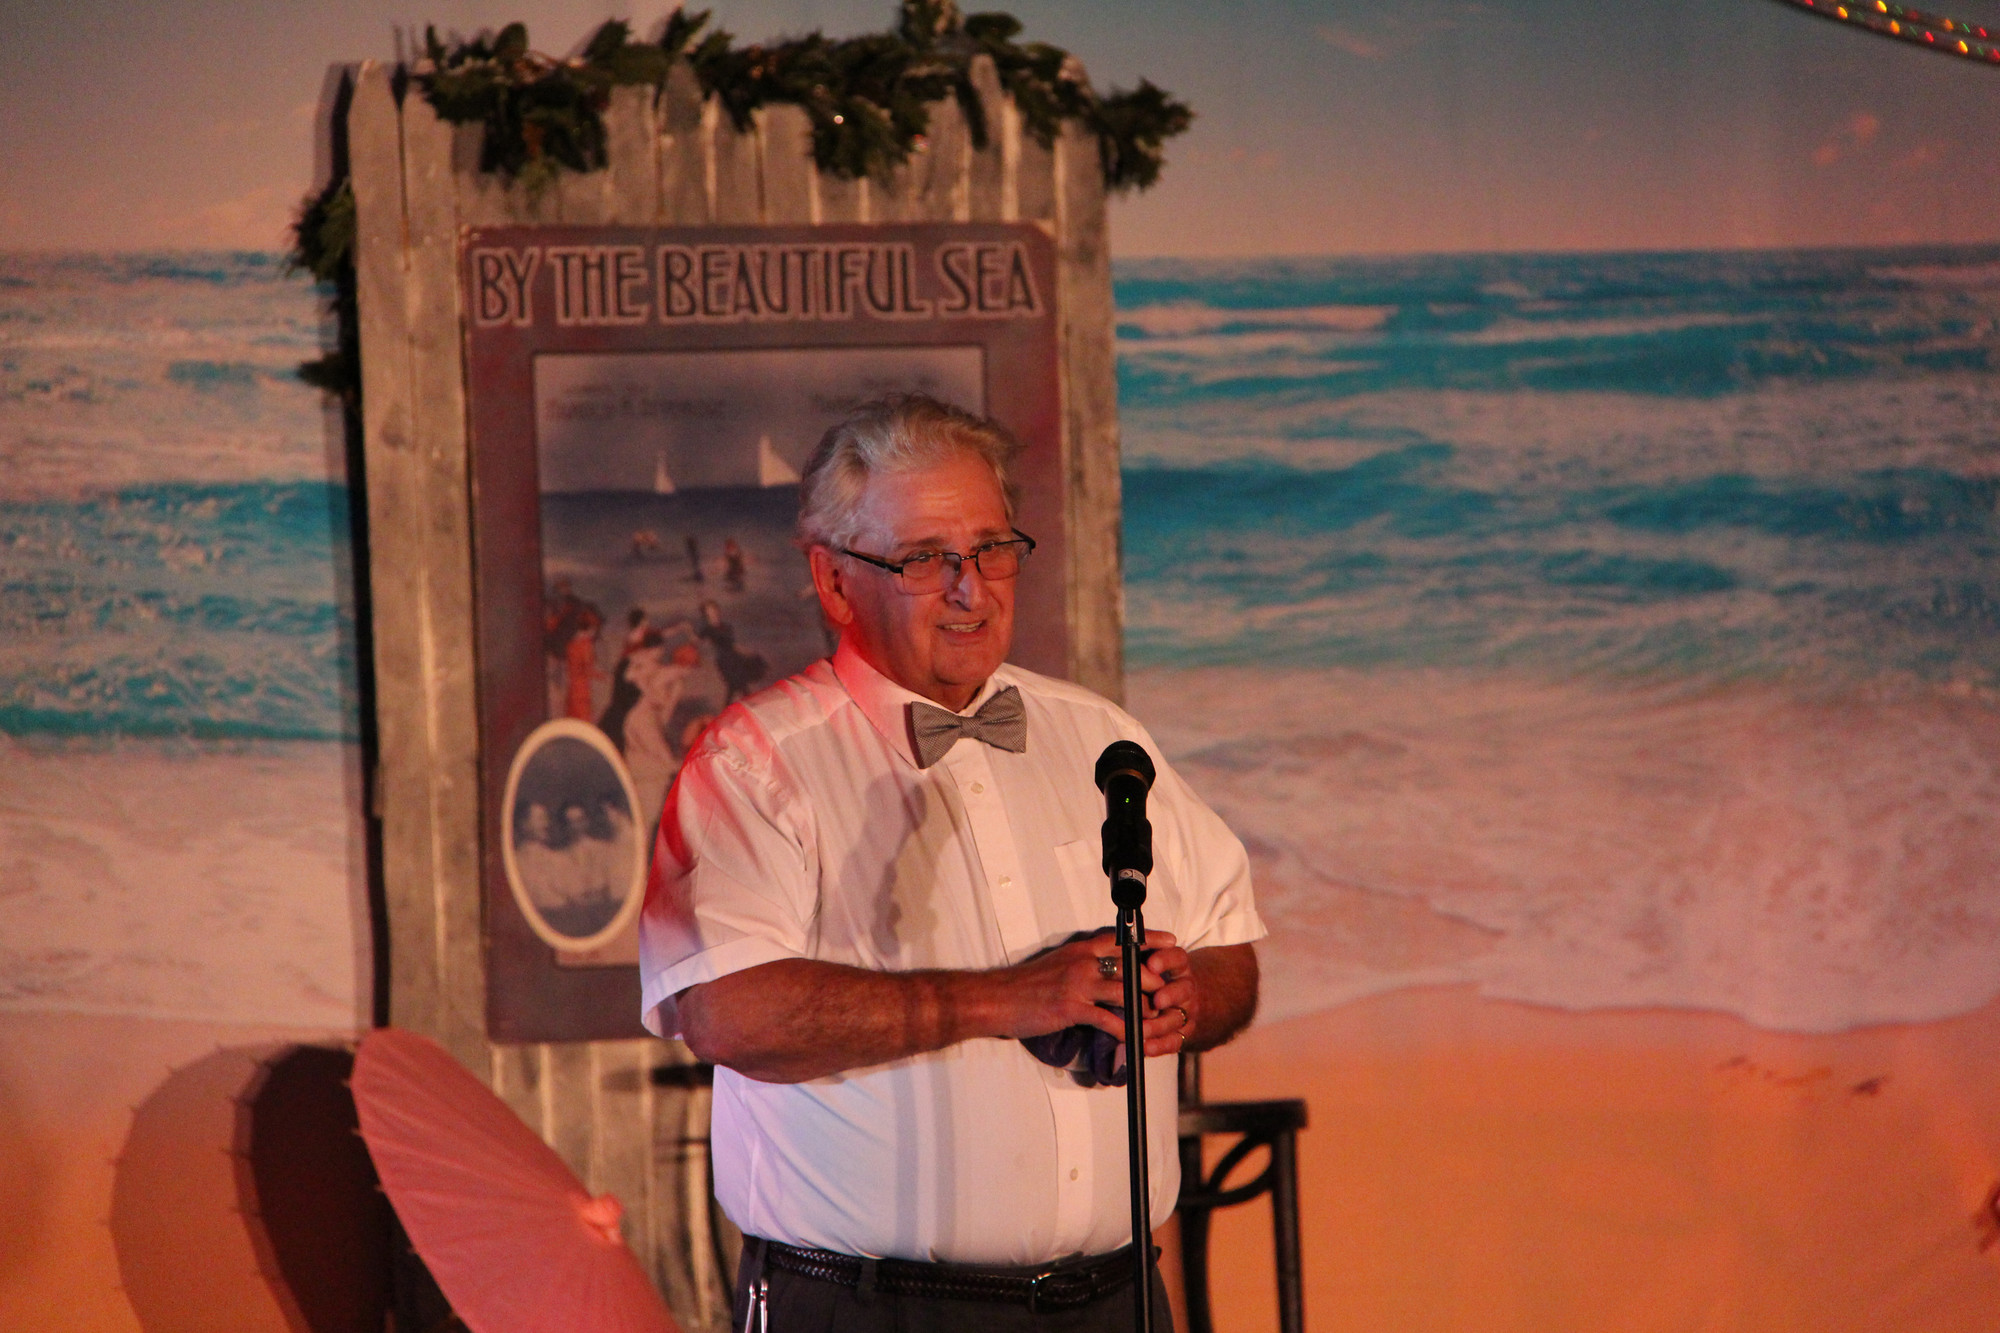 Johne Pane, president of the South Shore Theatricals board of directors, addressed the audience before the opening curtain of “A South Shore Summer” at the South Shore Jewish Center.